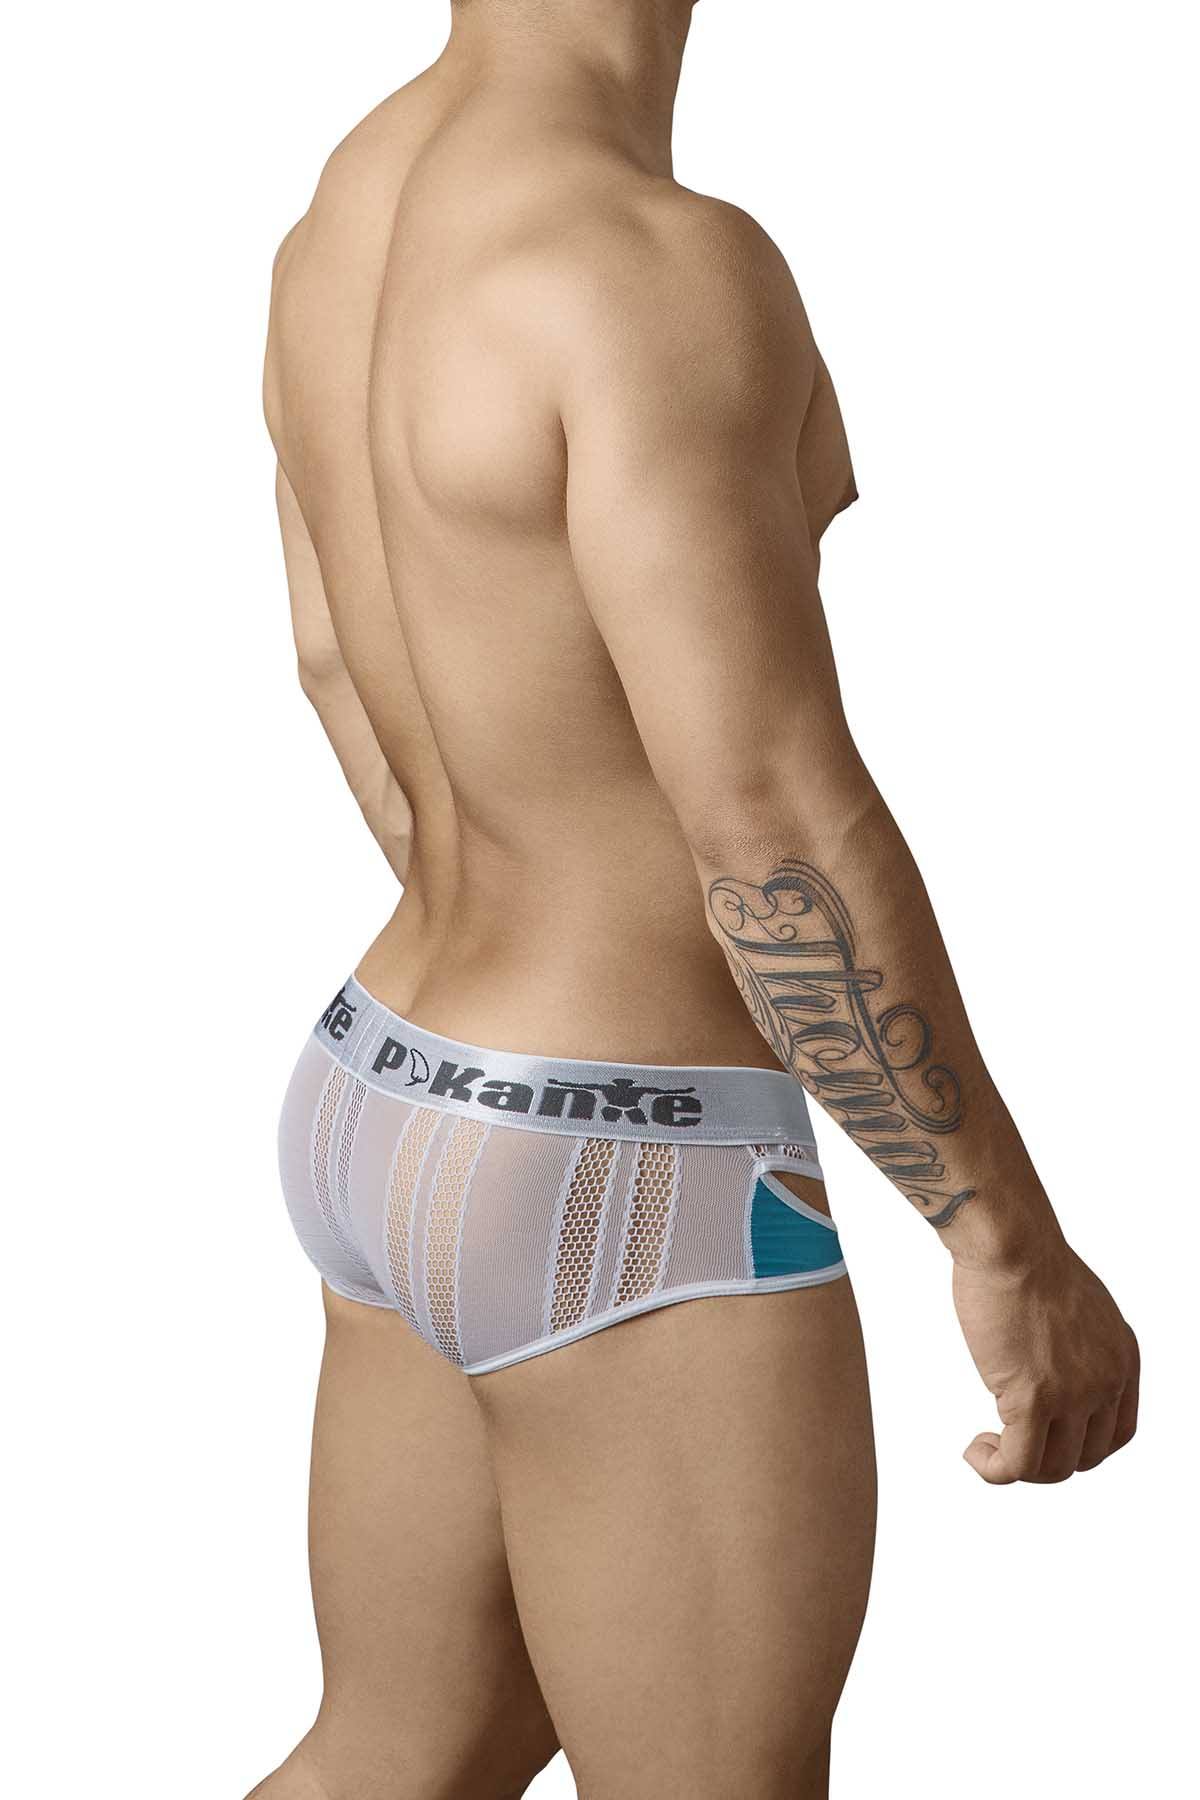 Pikante White/Teal Spicy Brief